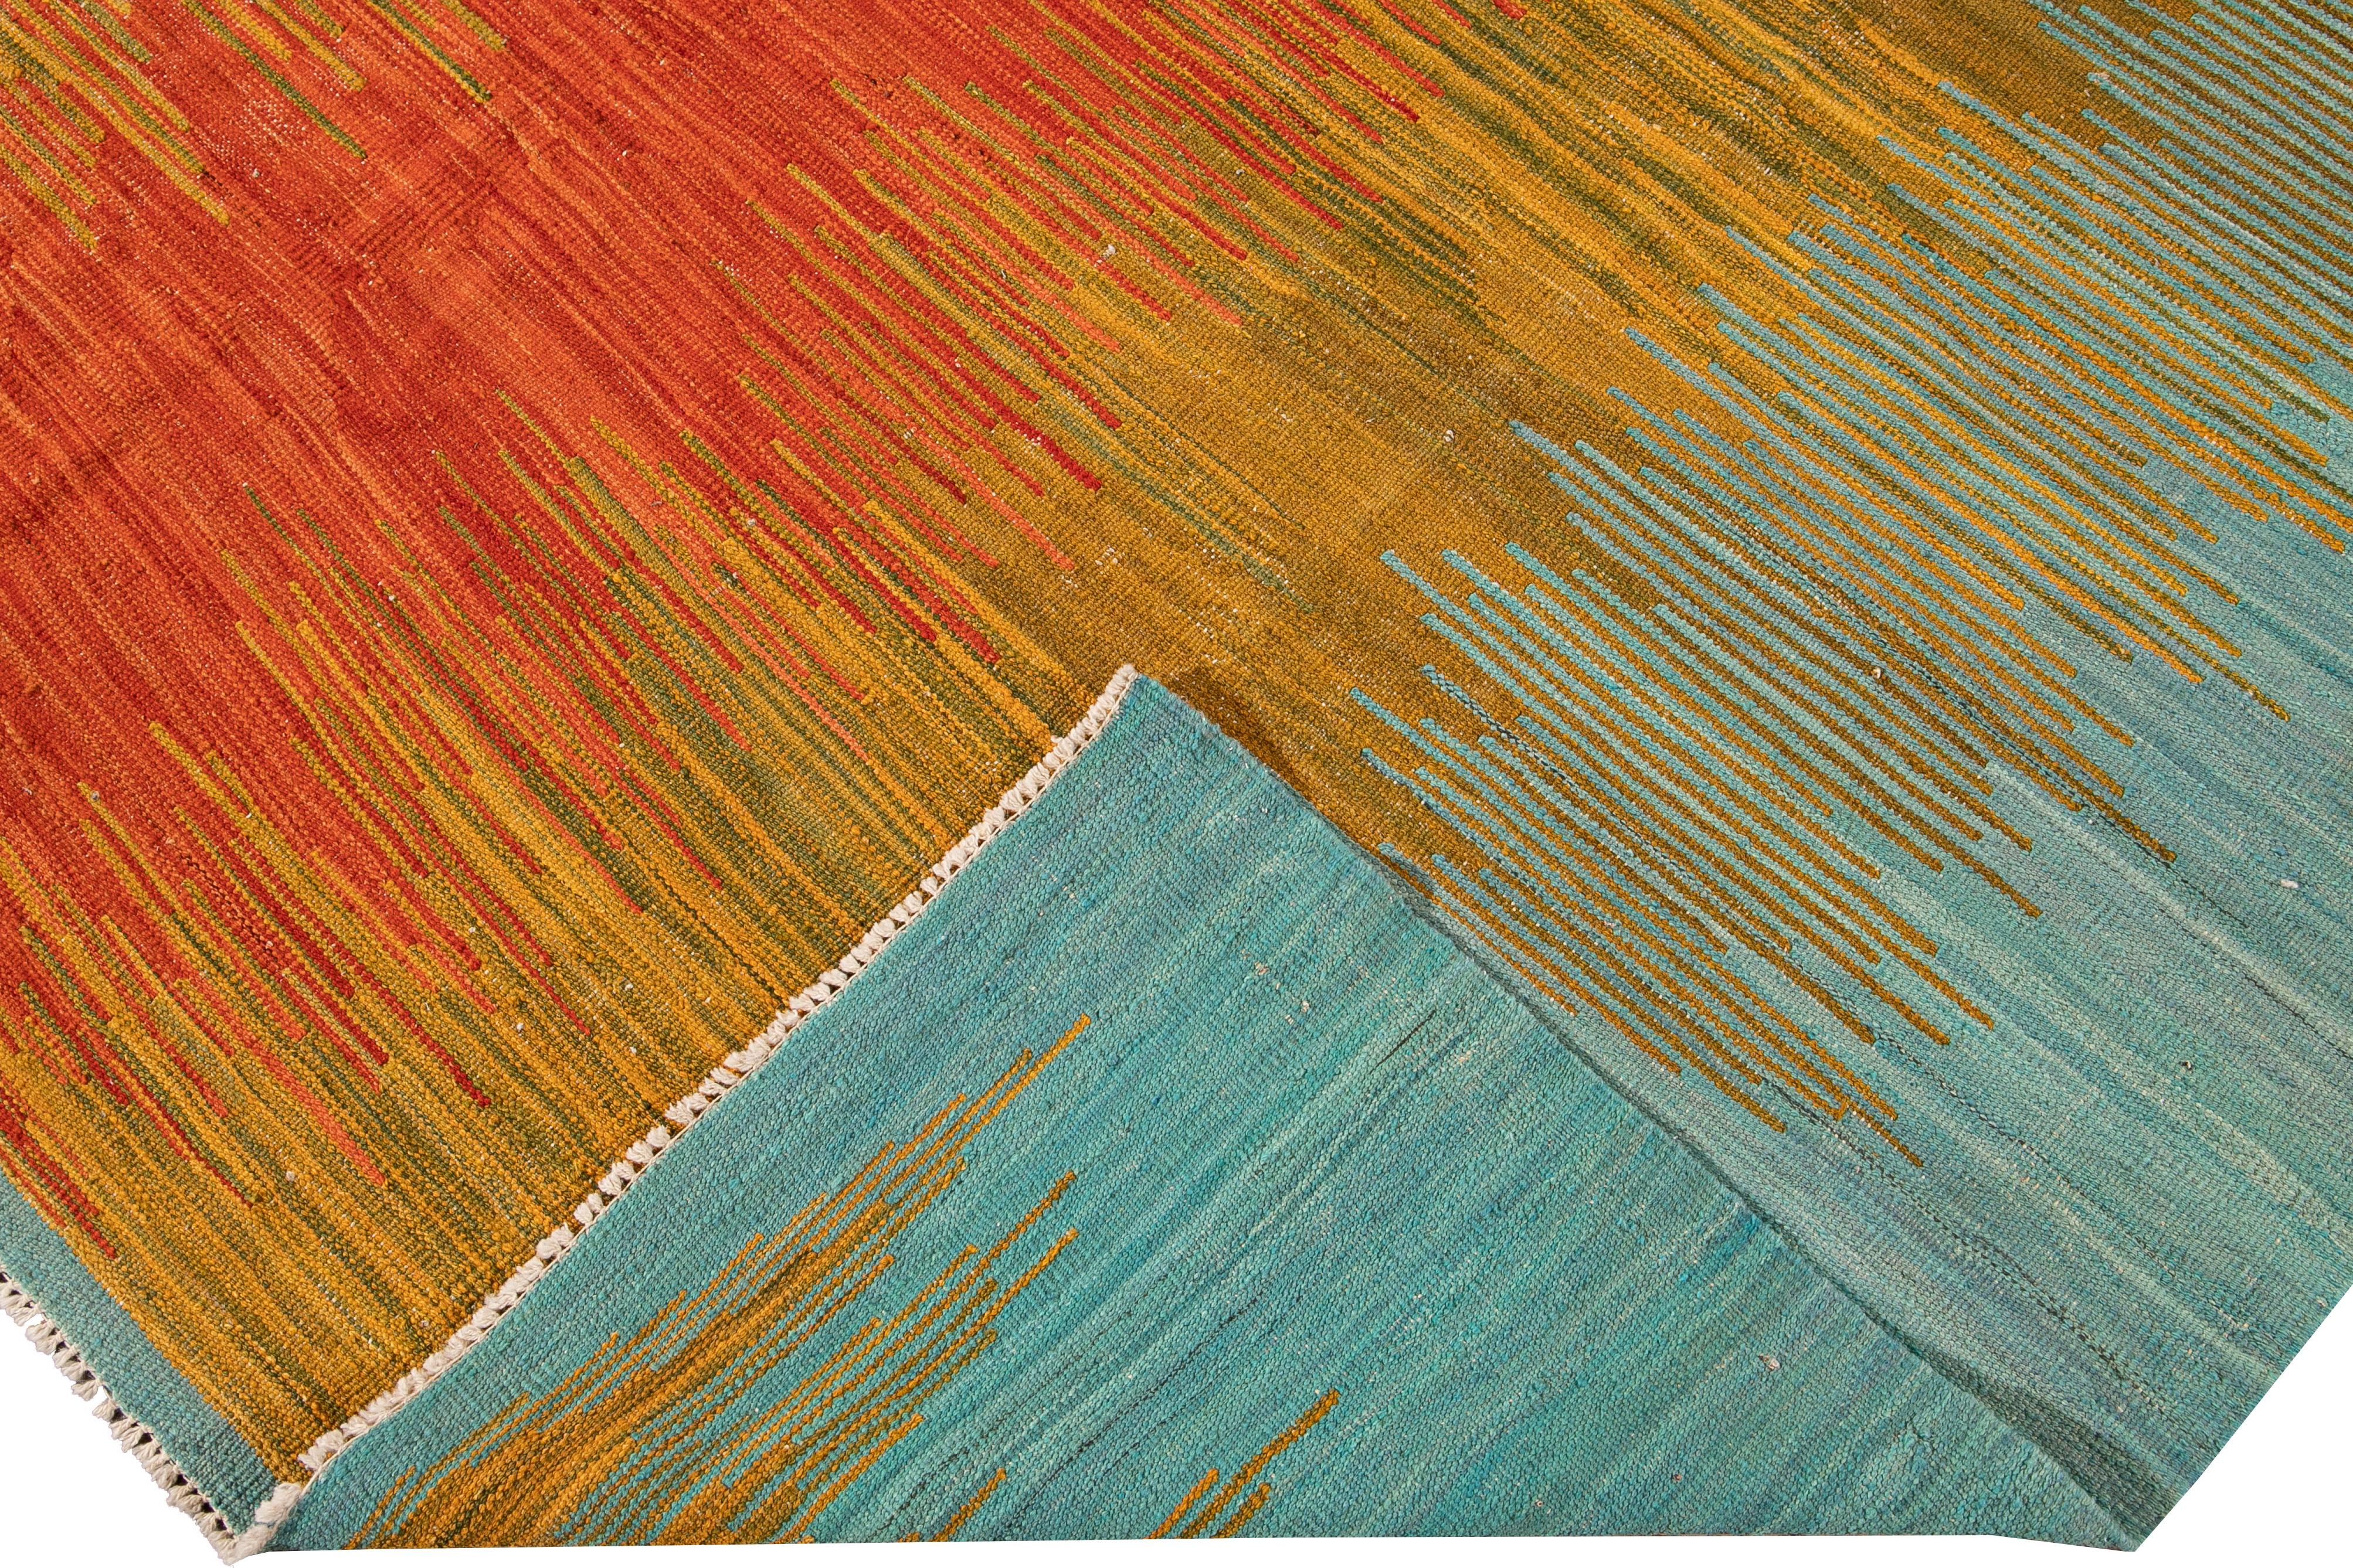 Beautiful modern Kilim flat-weave wool rug. This Kilim rug full of art has an orange, yellow, and blue field in a gorgeous geometric color abstract design.

This rug measures: 7'9